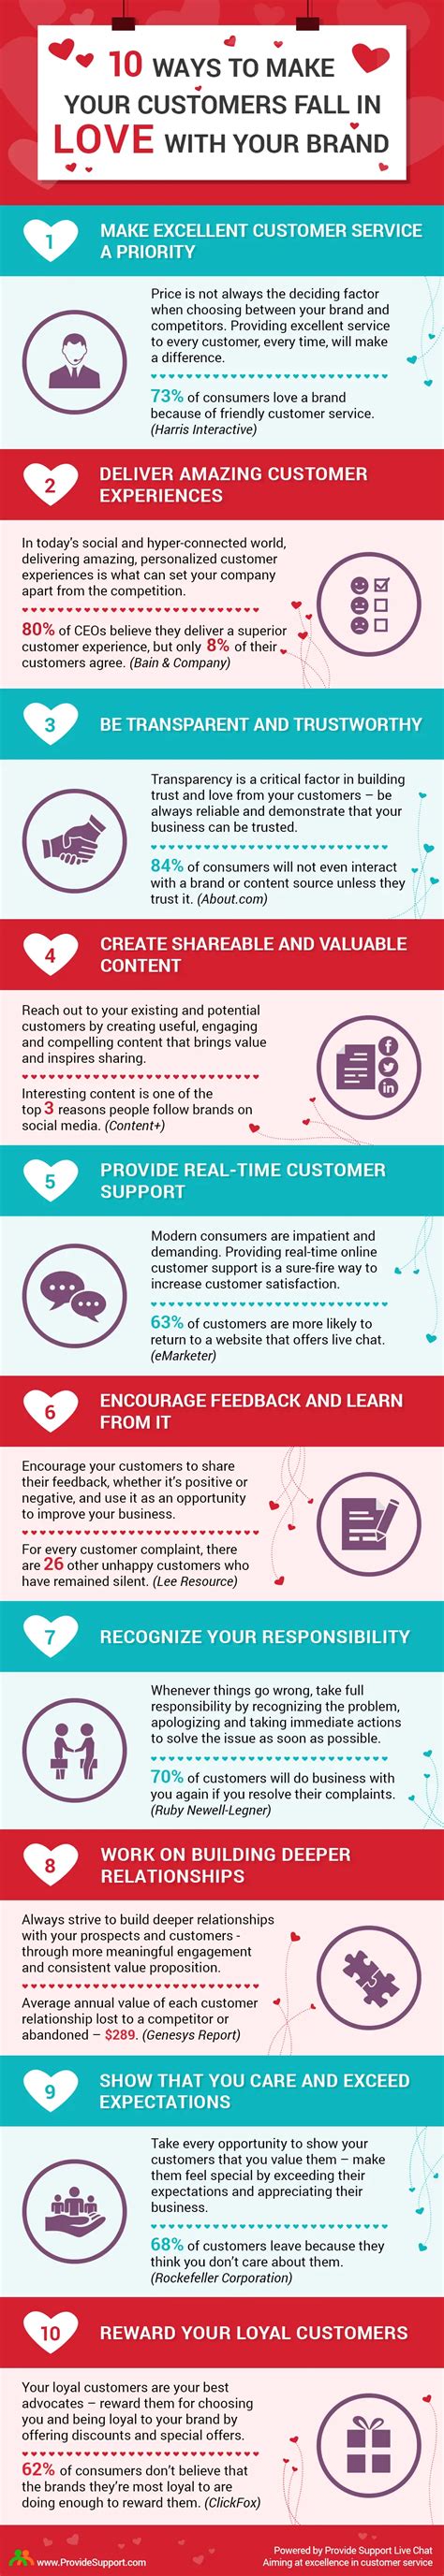 Infographic How To Make Customers Fall In Love With Your Brand